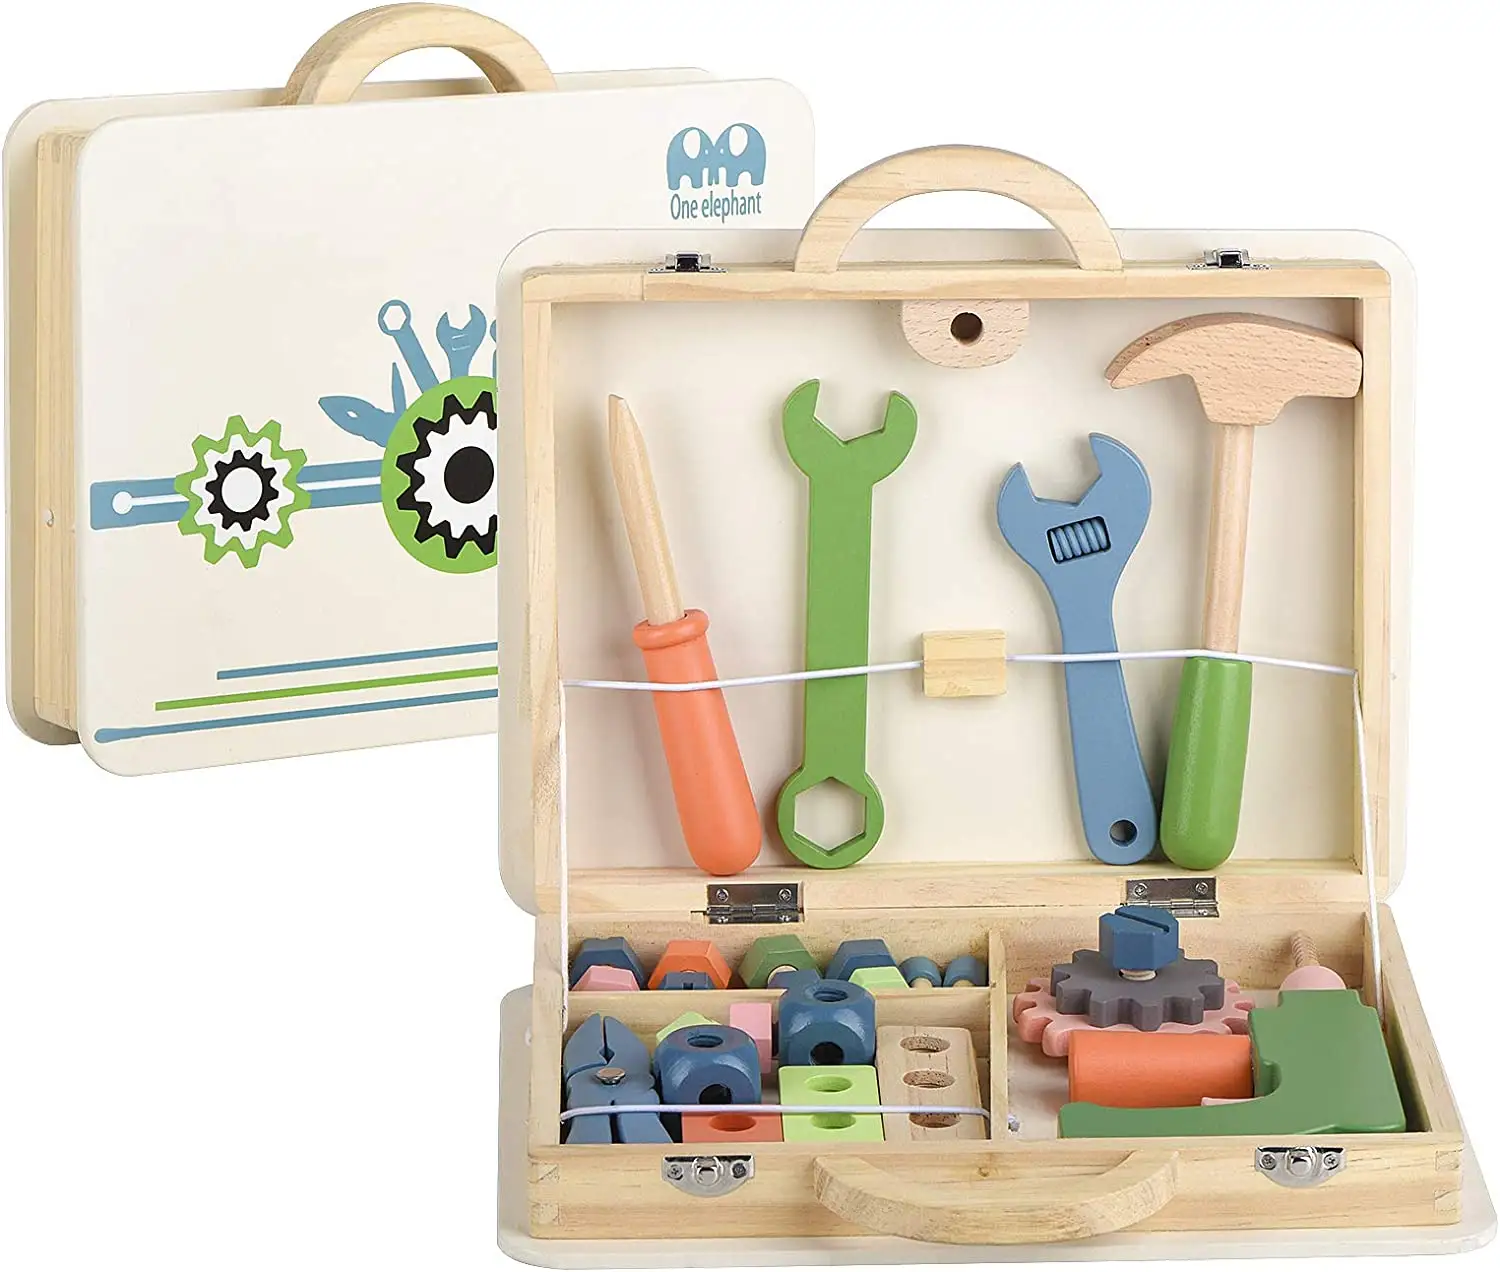 Wooden Tool Kit for Kid with Wooden Tool Box Educational DIY Construction STEM Toy Preschool Learning Toy Gifts for Toddlers